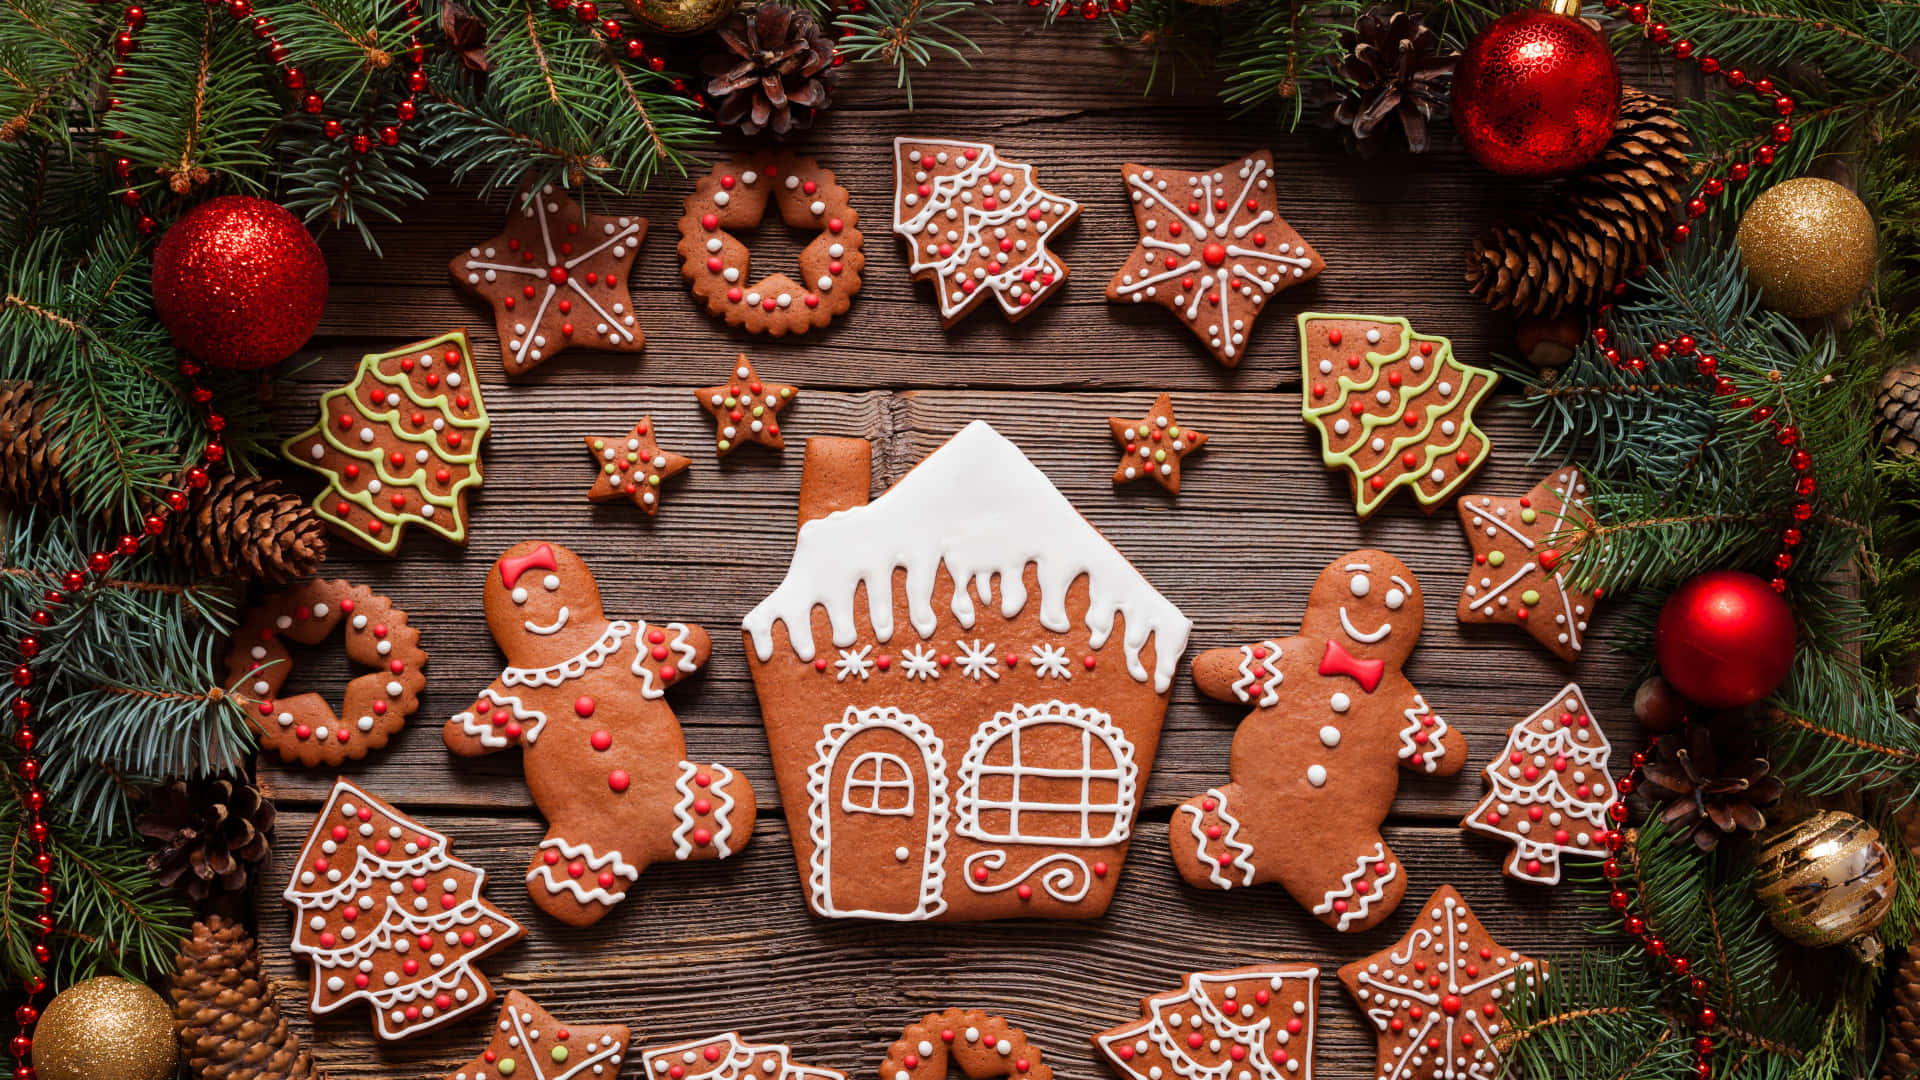 Delightful Gingerbread House and Cookies